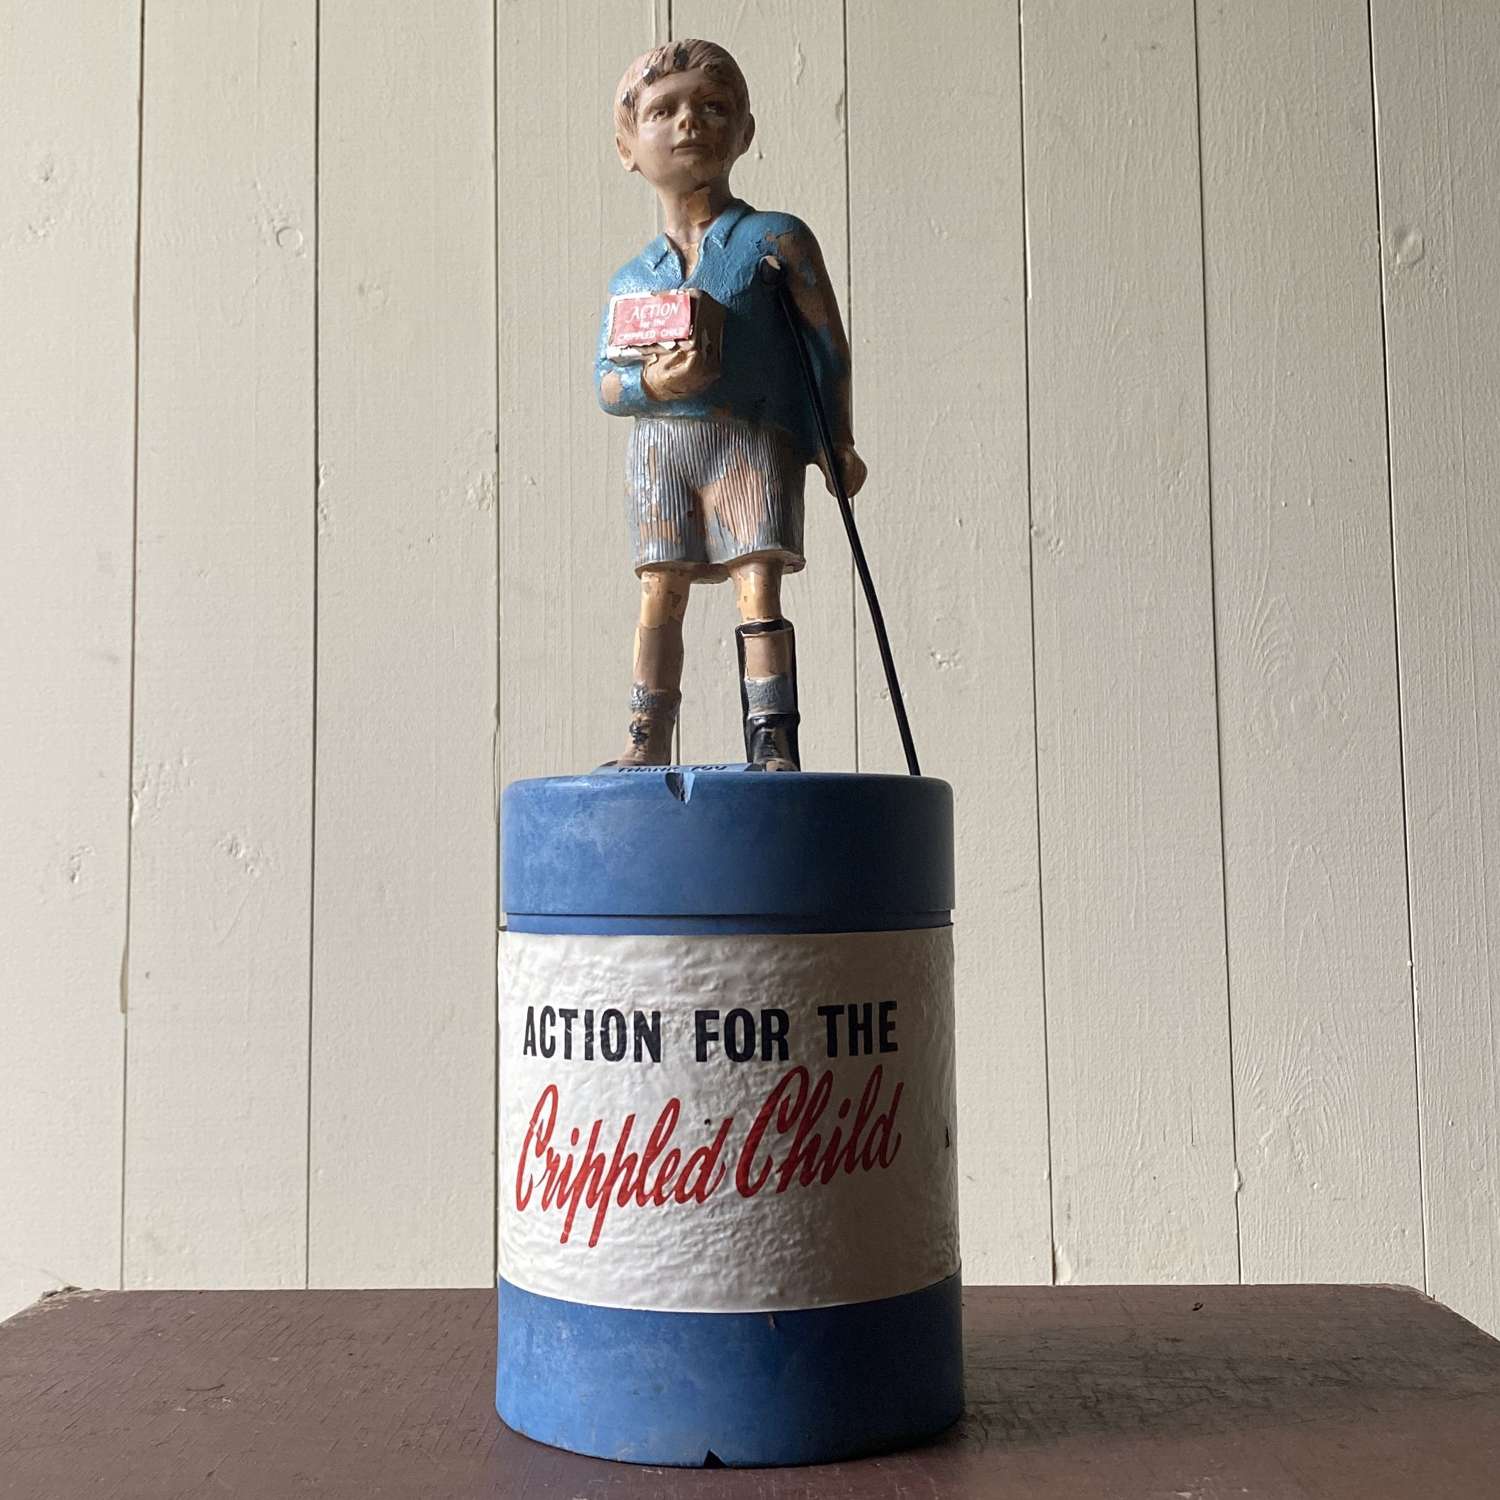 Vintage Charity Collection Box - Crippled